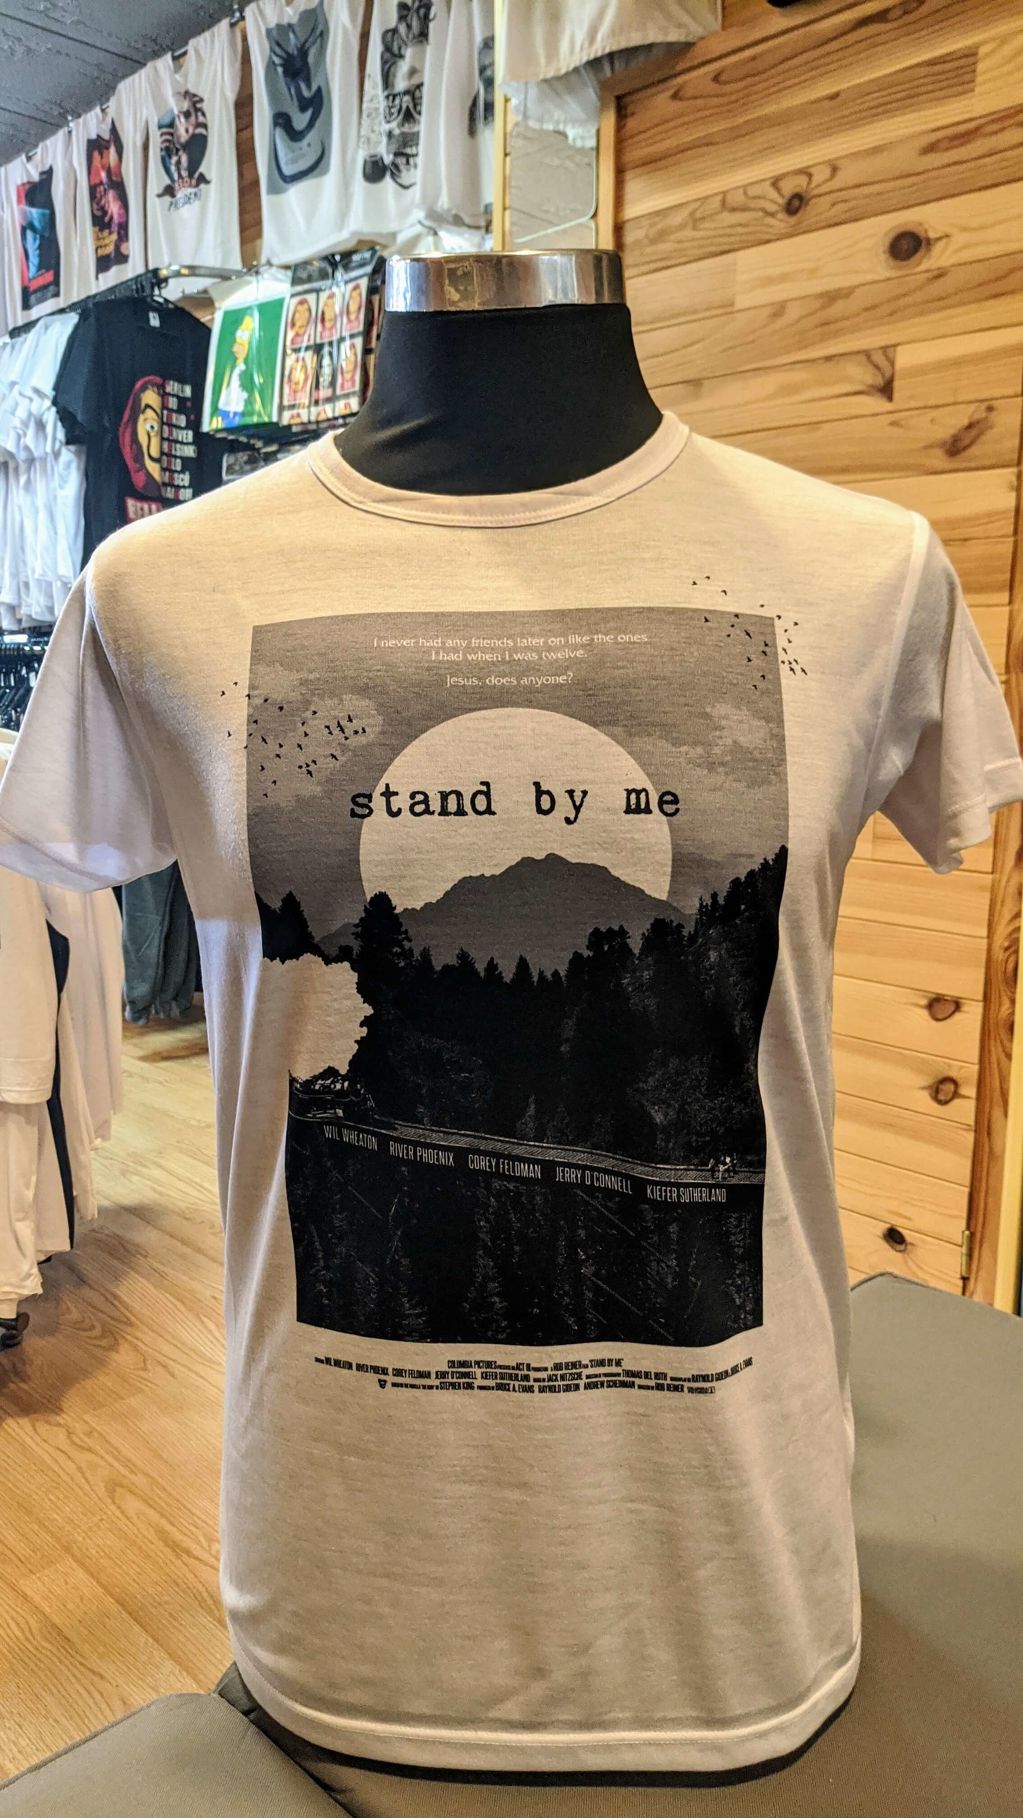 Stand by me - 587d9-camiseta-stand-by-me-2.jpg